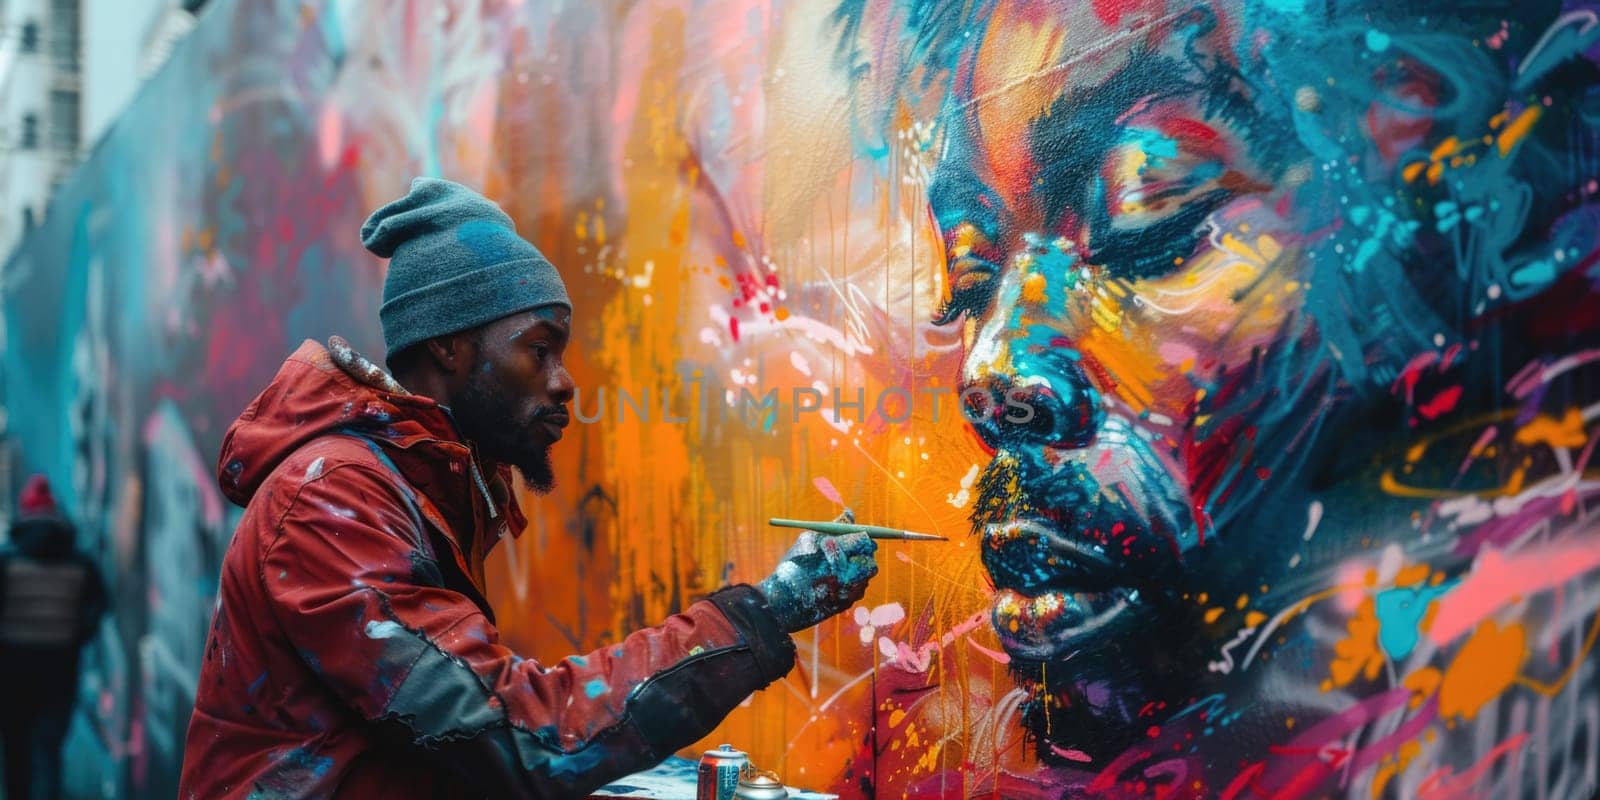 Man Painting Colorful Mural on Wall by but_photo